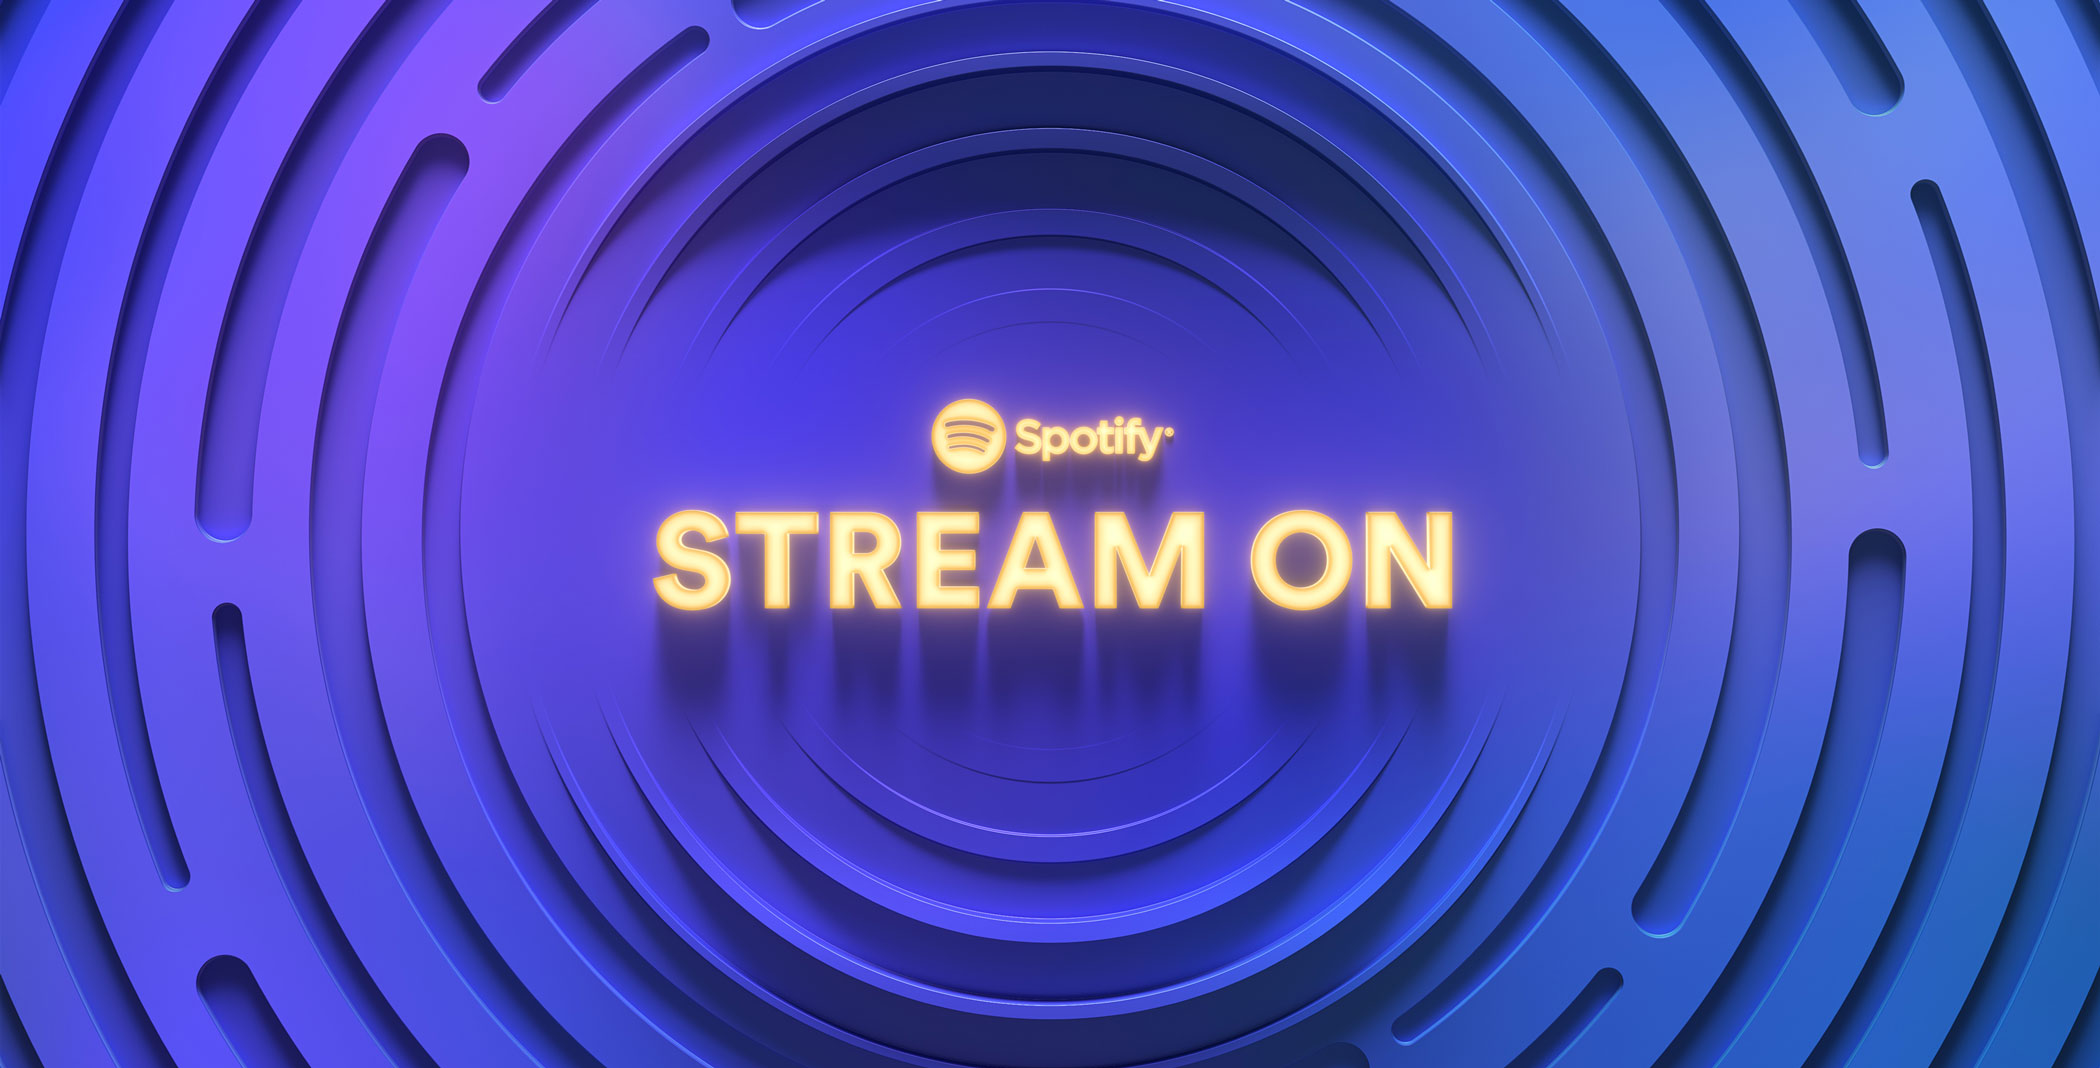 How to live stream Spotify’s Stream On 2023 event